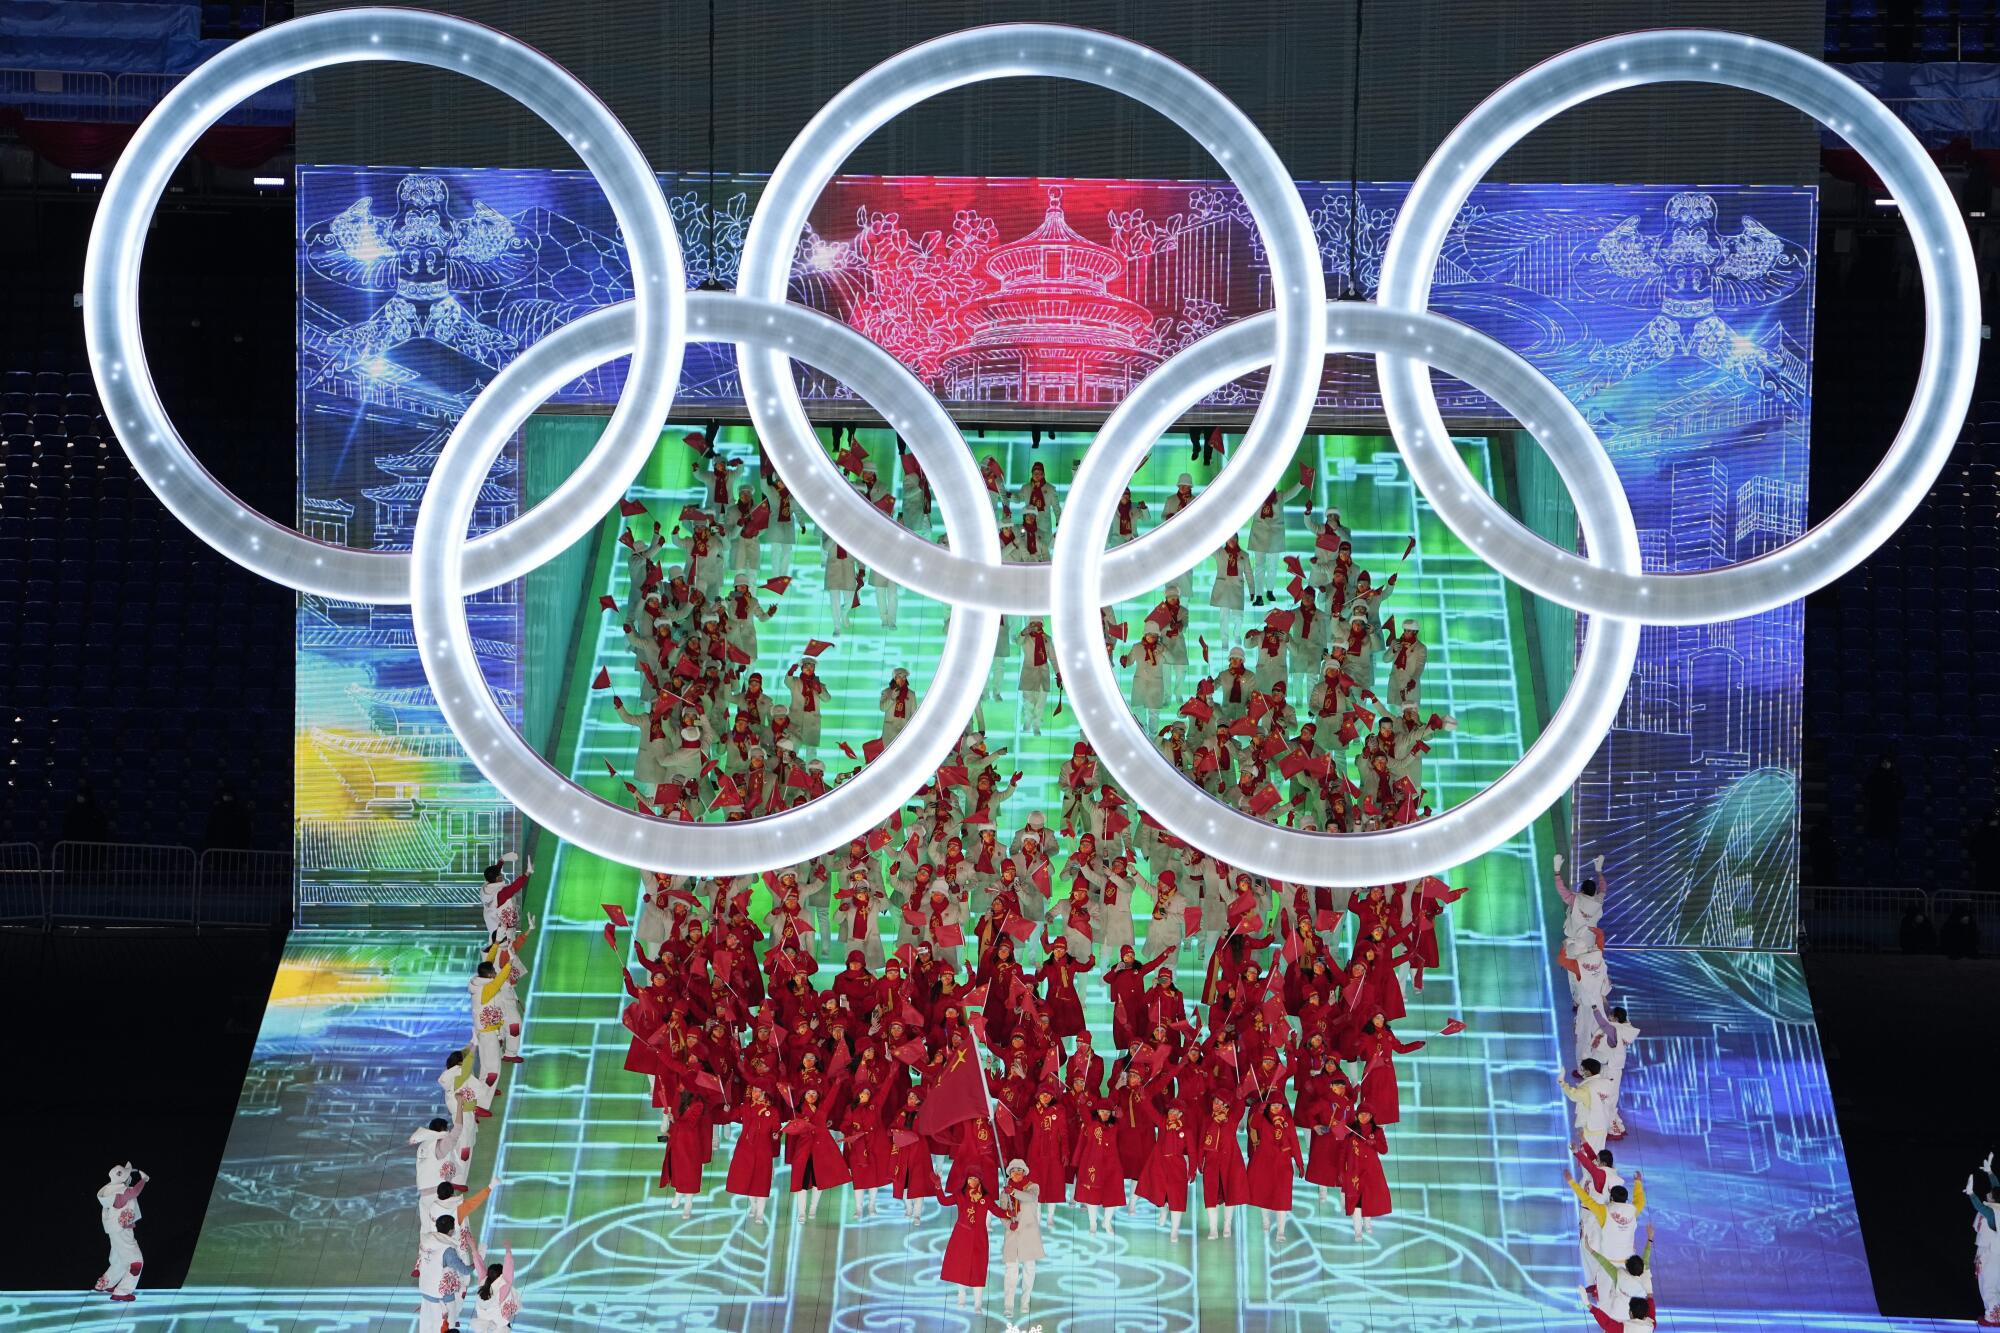 2022 Olympic Winter Games